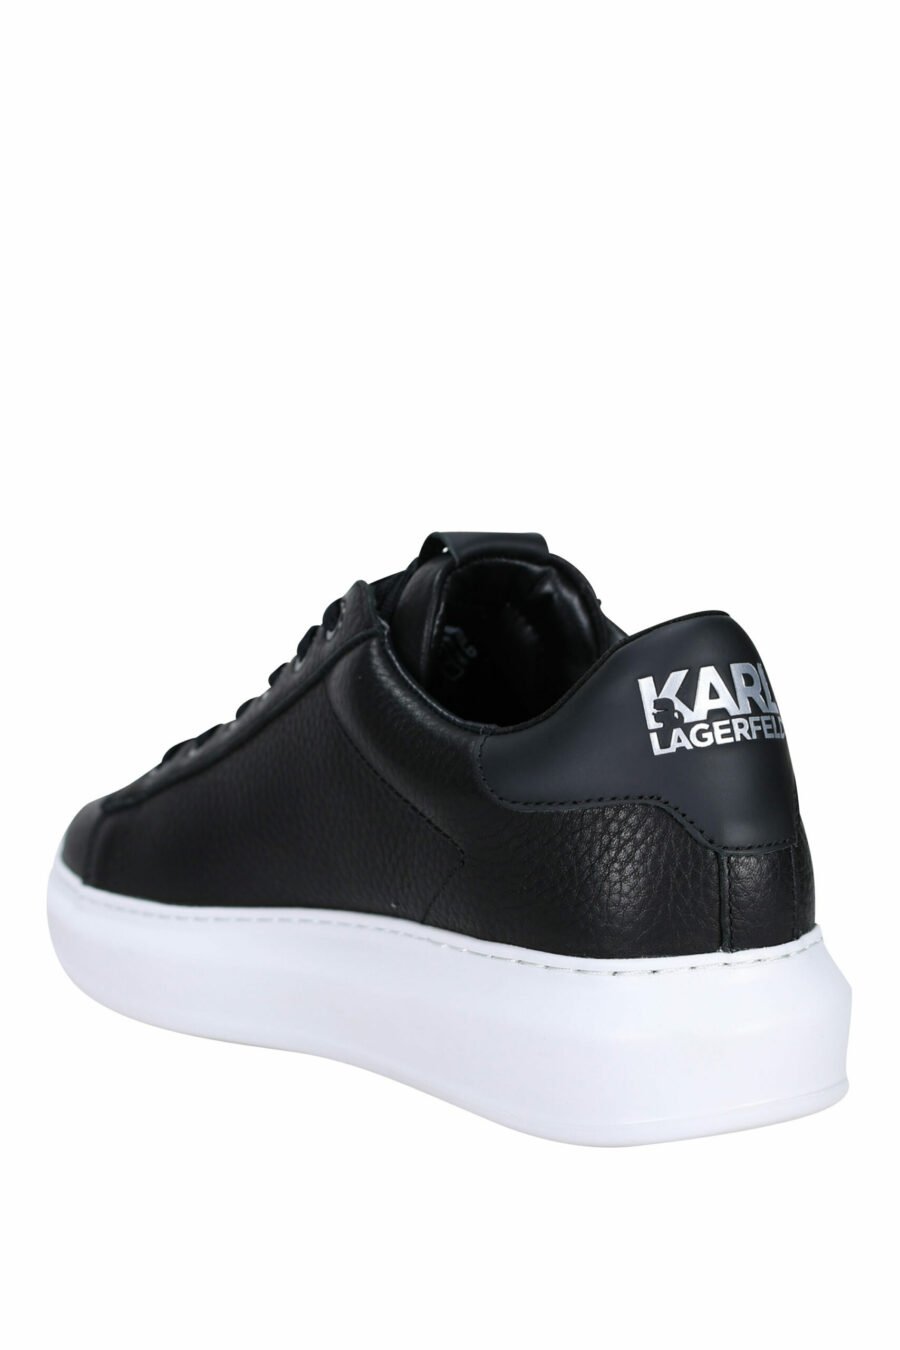 Black "kapri mens" textured trainers with white "rue st guillaume" logo - 5059529323782 3 scaled